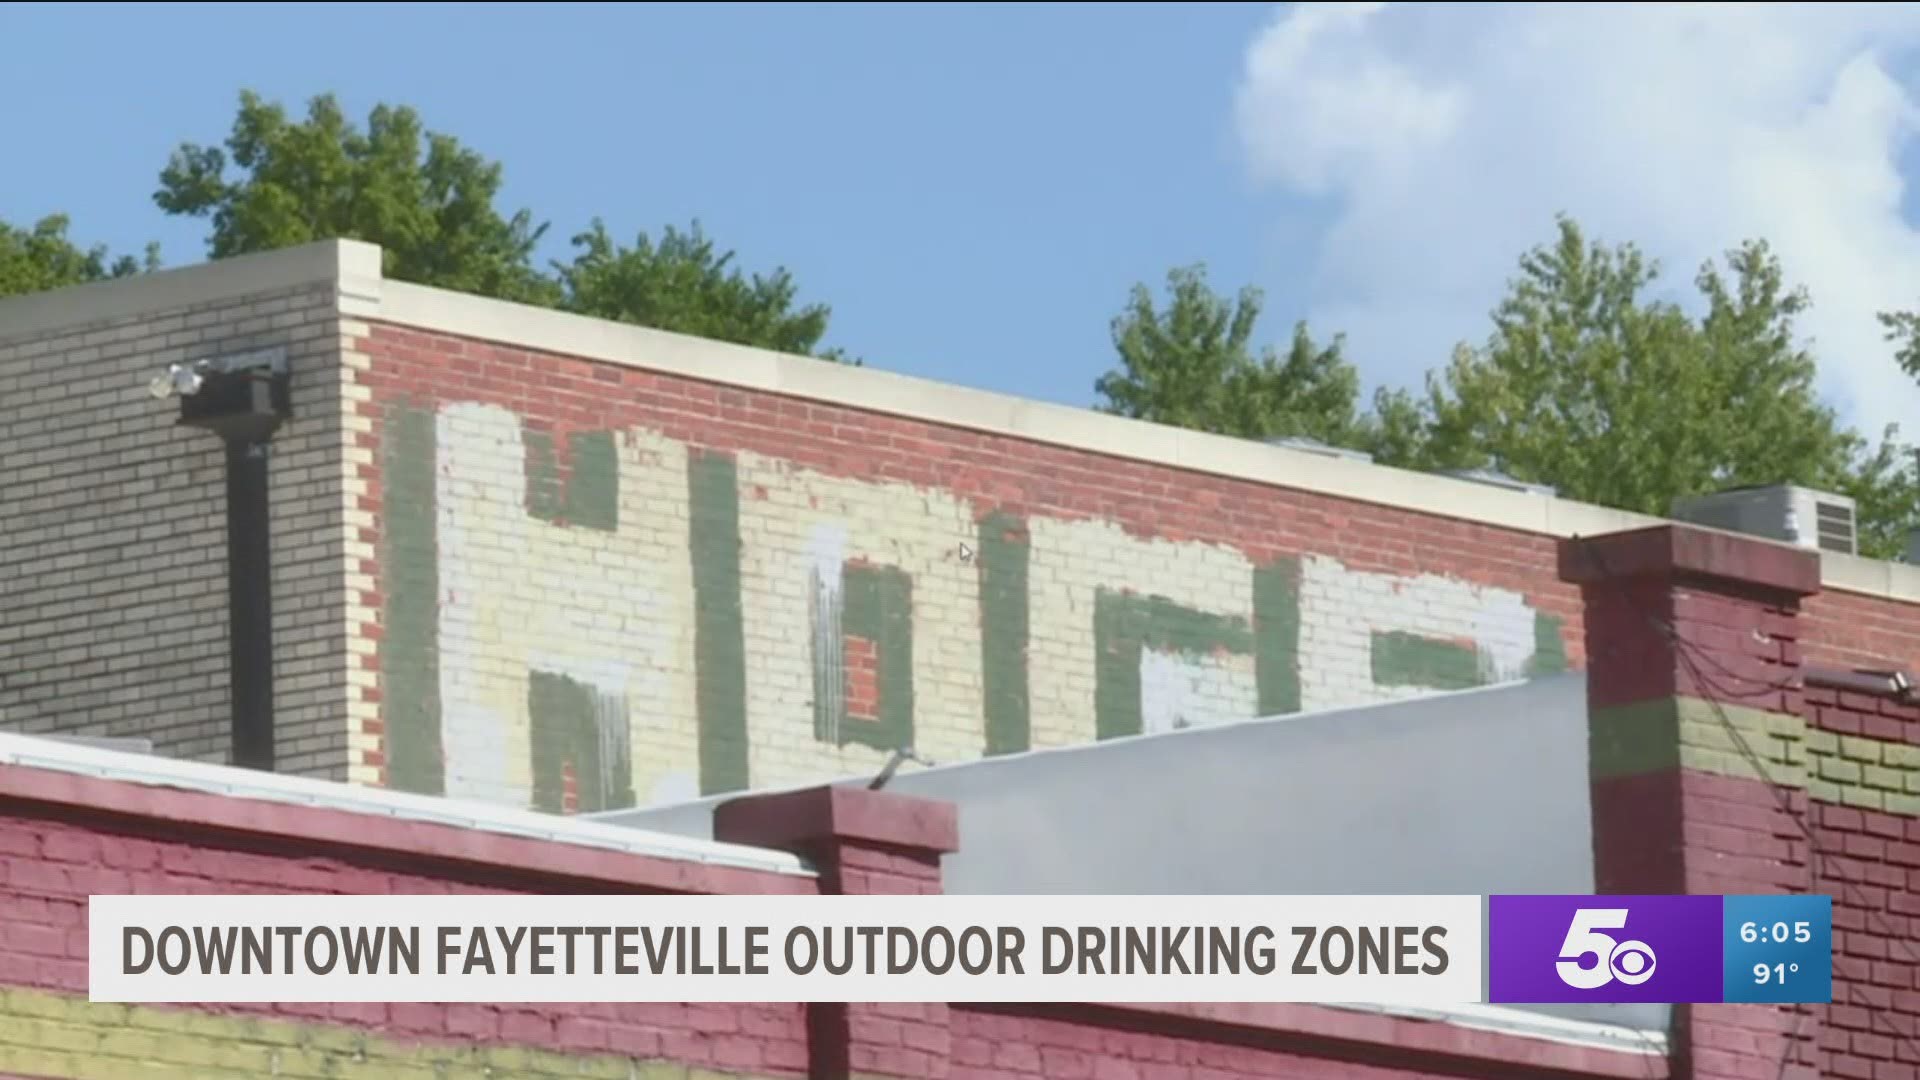 The City of Fayetteville will start a pilot program limited to a portion of the downtown area to offer to-go drinks. https://bit.ly/2CyBSl3